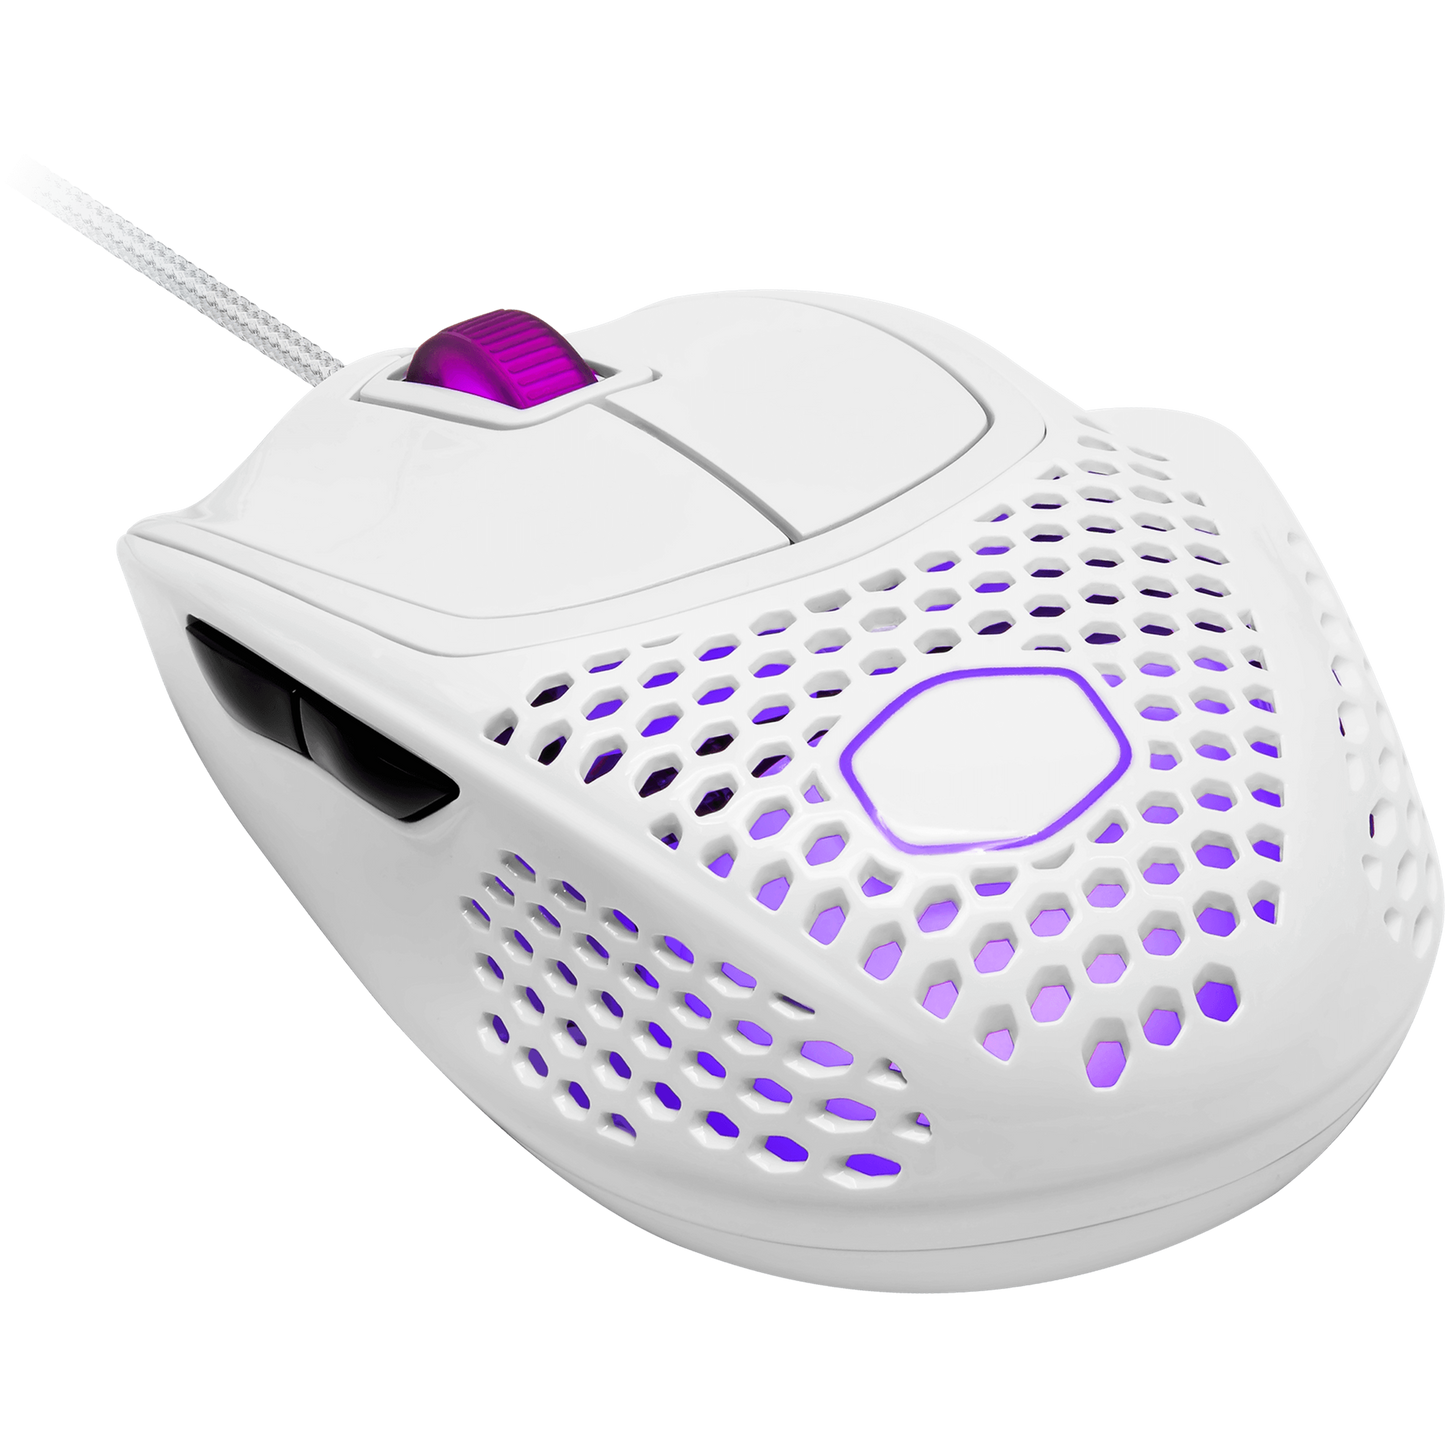 Cooler Master MM720 - Lightweight RGB Gaming Mouse - Glossy White